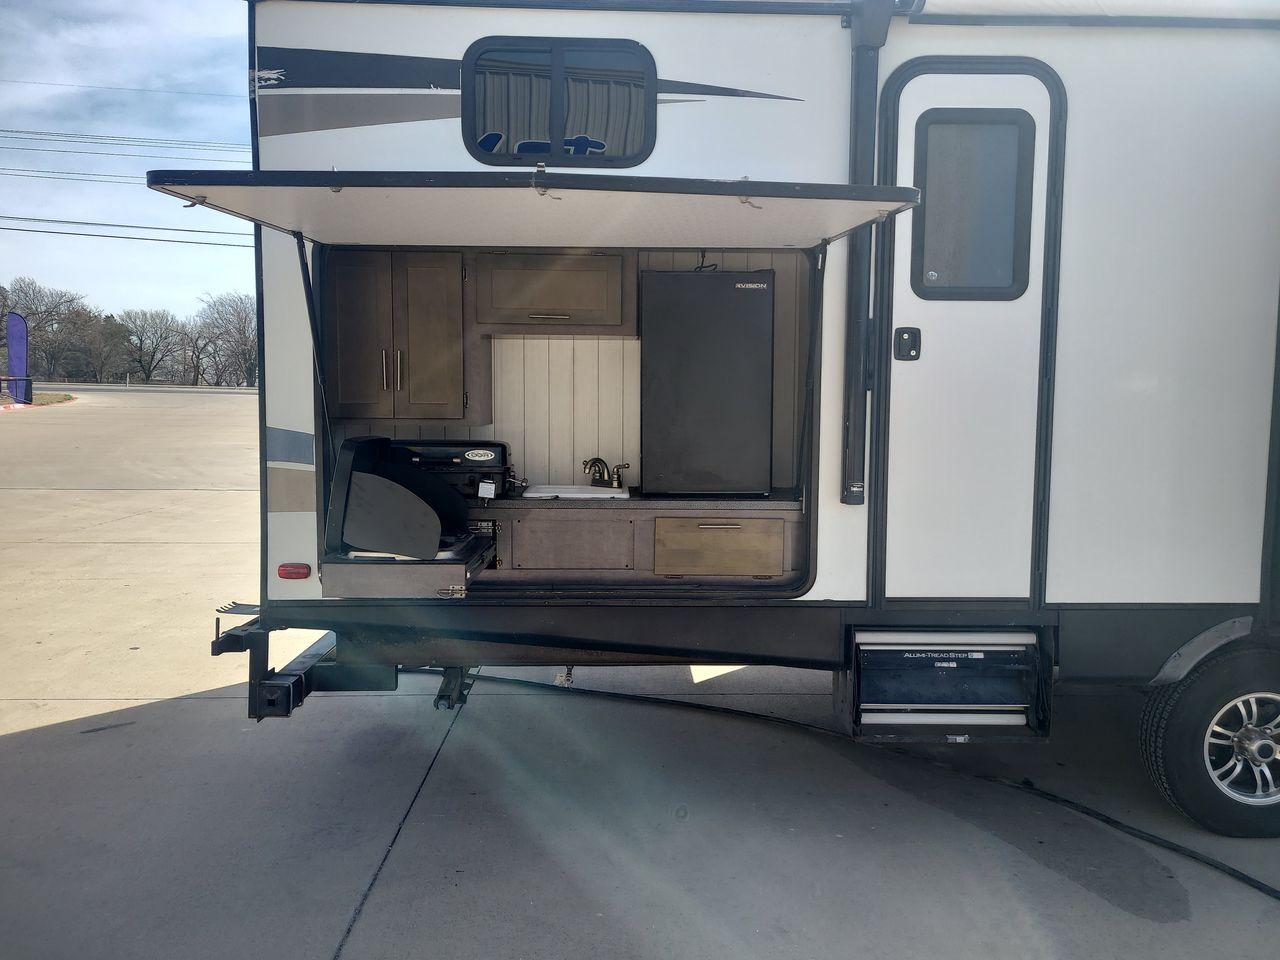 2018 KEYSTONE SUNSET TRAIL 331BH (4YDT33123J5) , Length: 37.5 ft. | Dry Weight: 7,186 lbs. | Gross Weight: 9,735 lbs. | Slides: 3 transmission, located at 4319 N Main St, Cleburne, TX, 76033, (817) 678-5133, 32.385960, -97.391212 - Board this 2018 Keystone Sunset Trail 331BH to your family's dream destination and enjoy all the fantastic amenities it has to offer! It measures 37.5 ft. in length and 11.17 ft. in height. It has a dry weight of 7,186 lbs. with a hitch weight of 936 lbs. Its exterior is white with black graphics. I - Photo #19